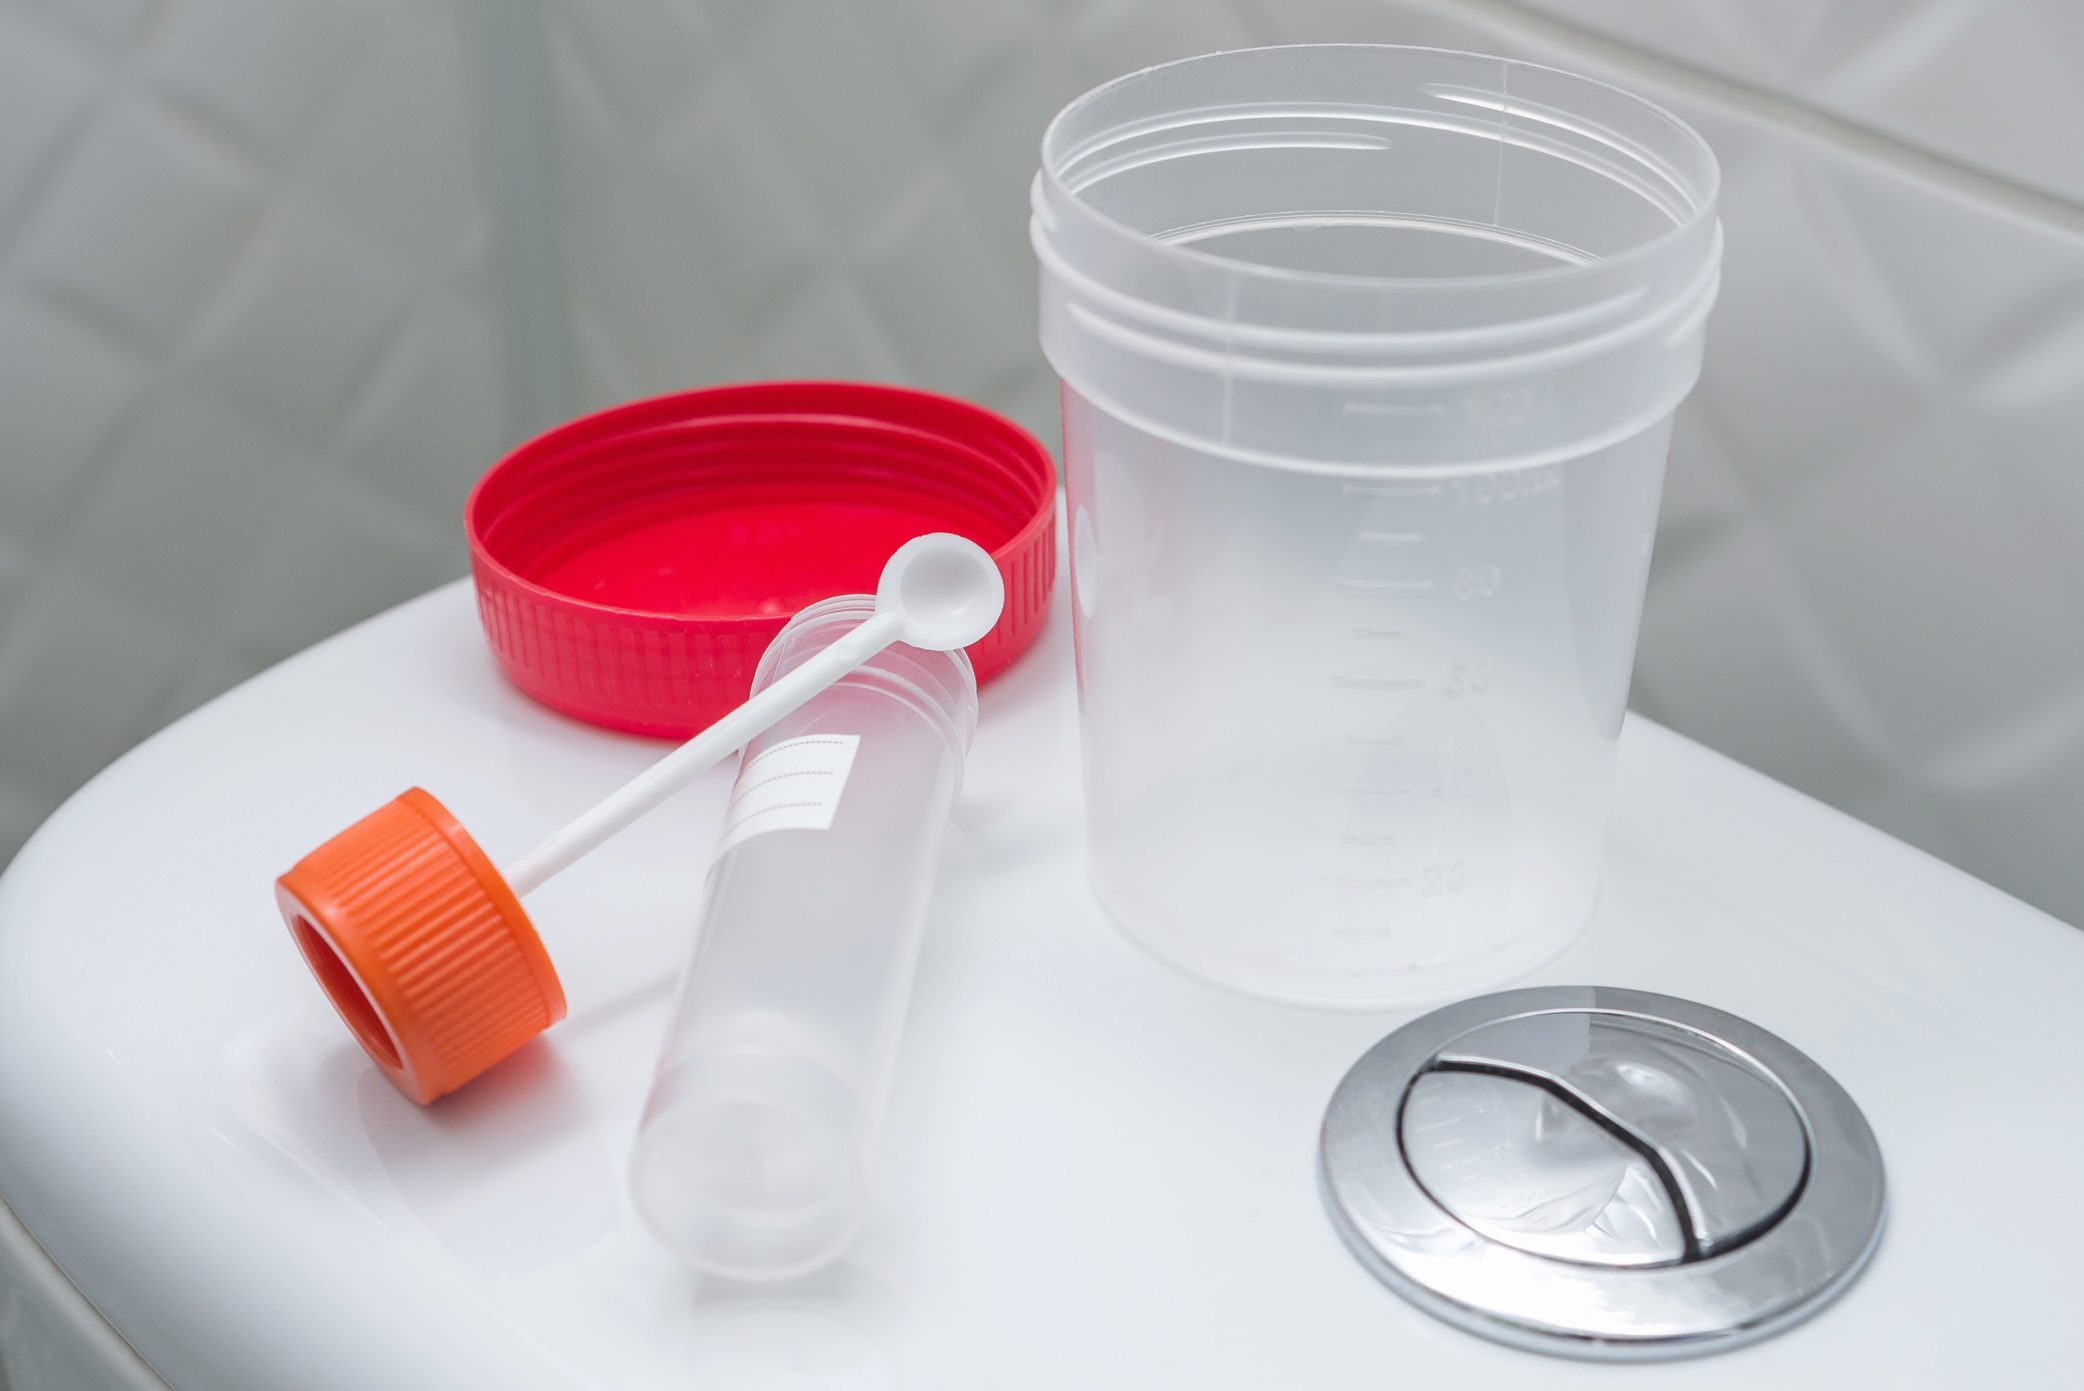 stool and urine sampling cups on back of toilet